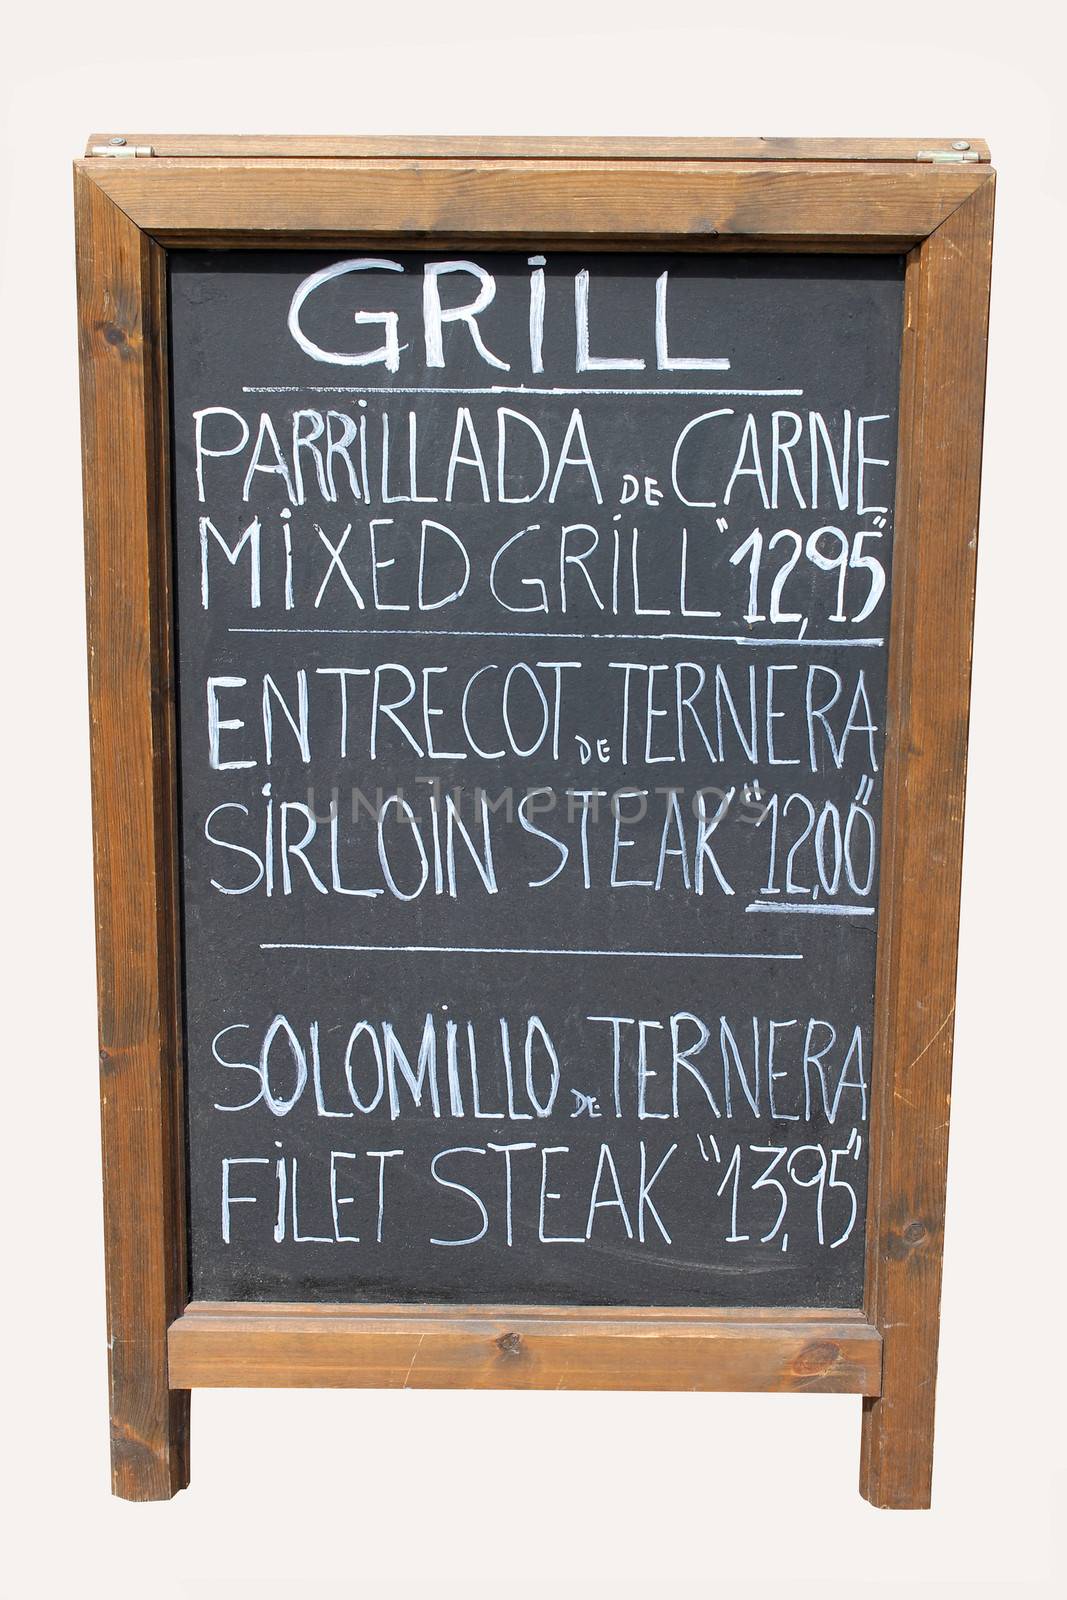 Mixed grill cafe sign on old wooden blackboard.